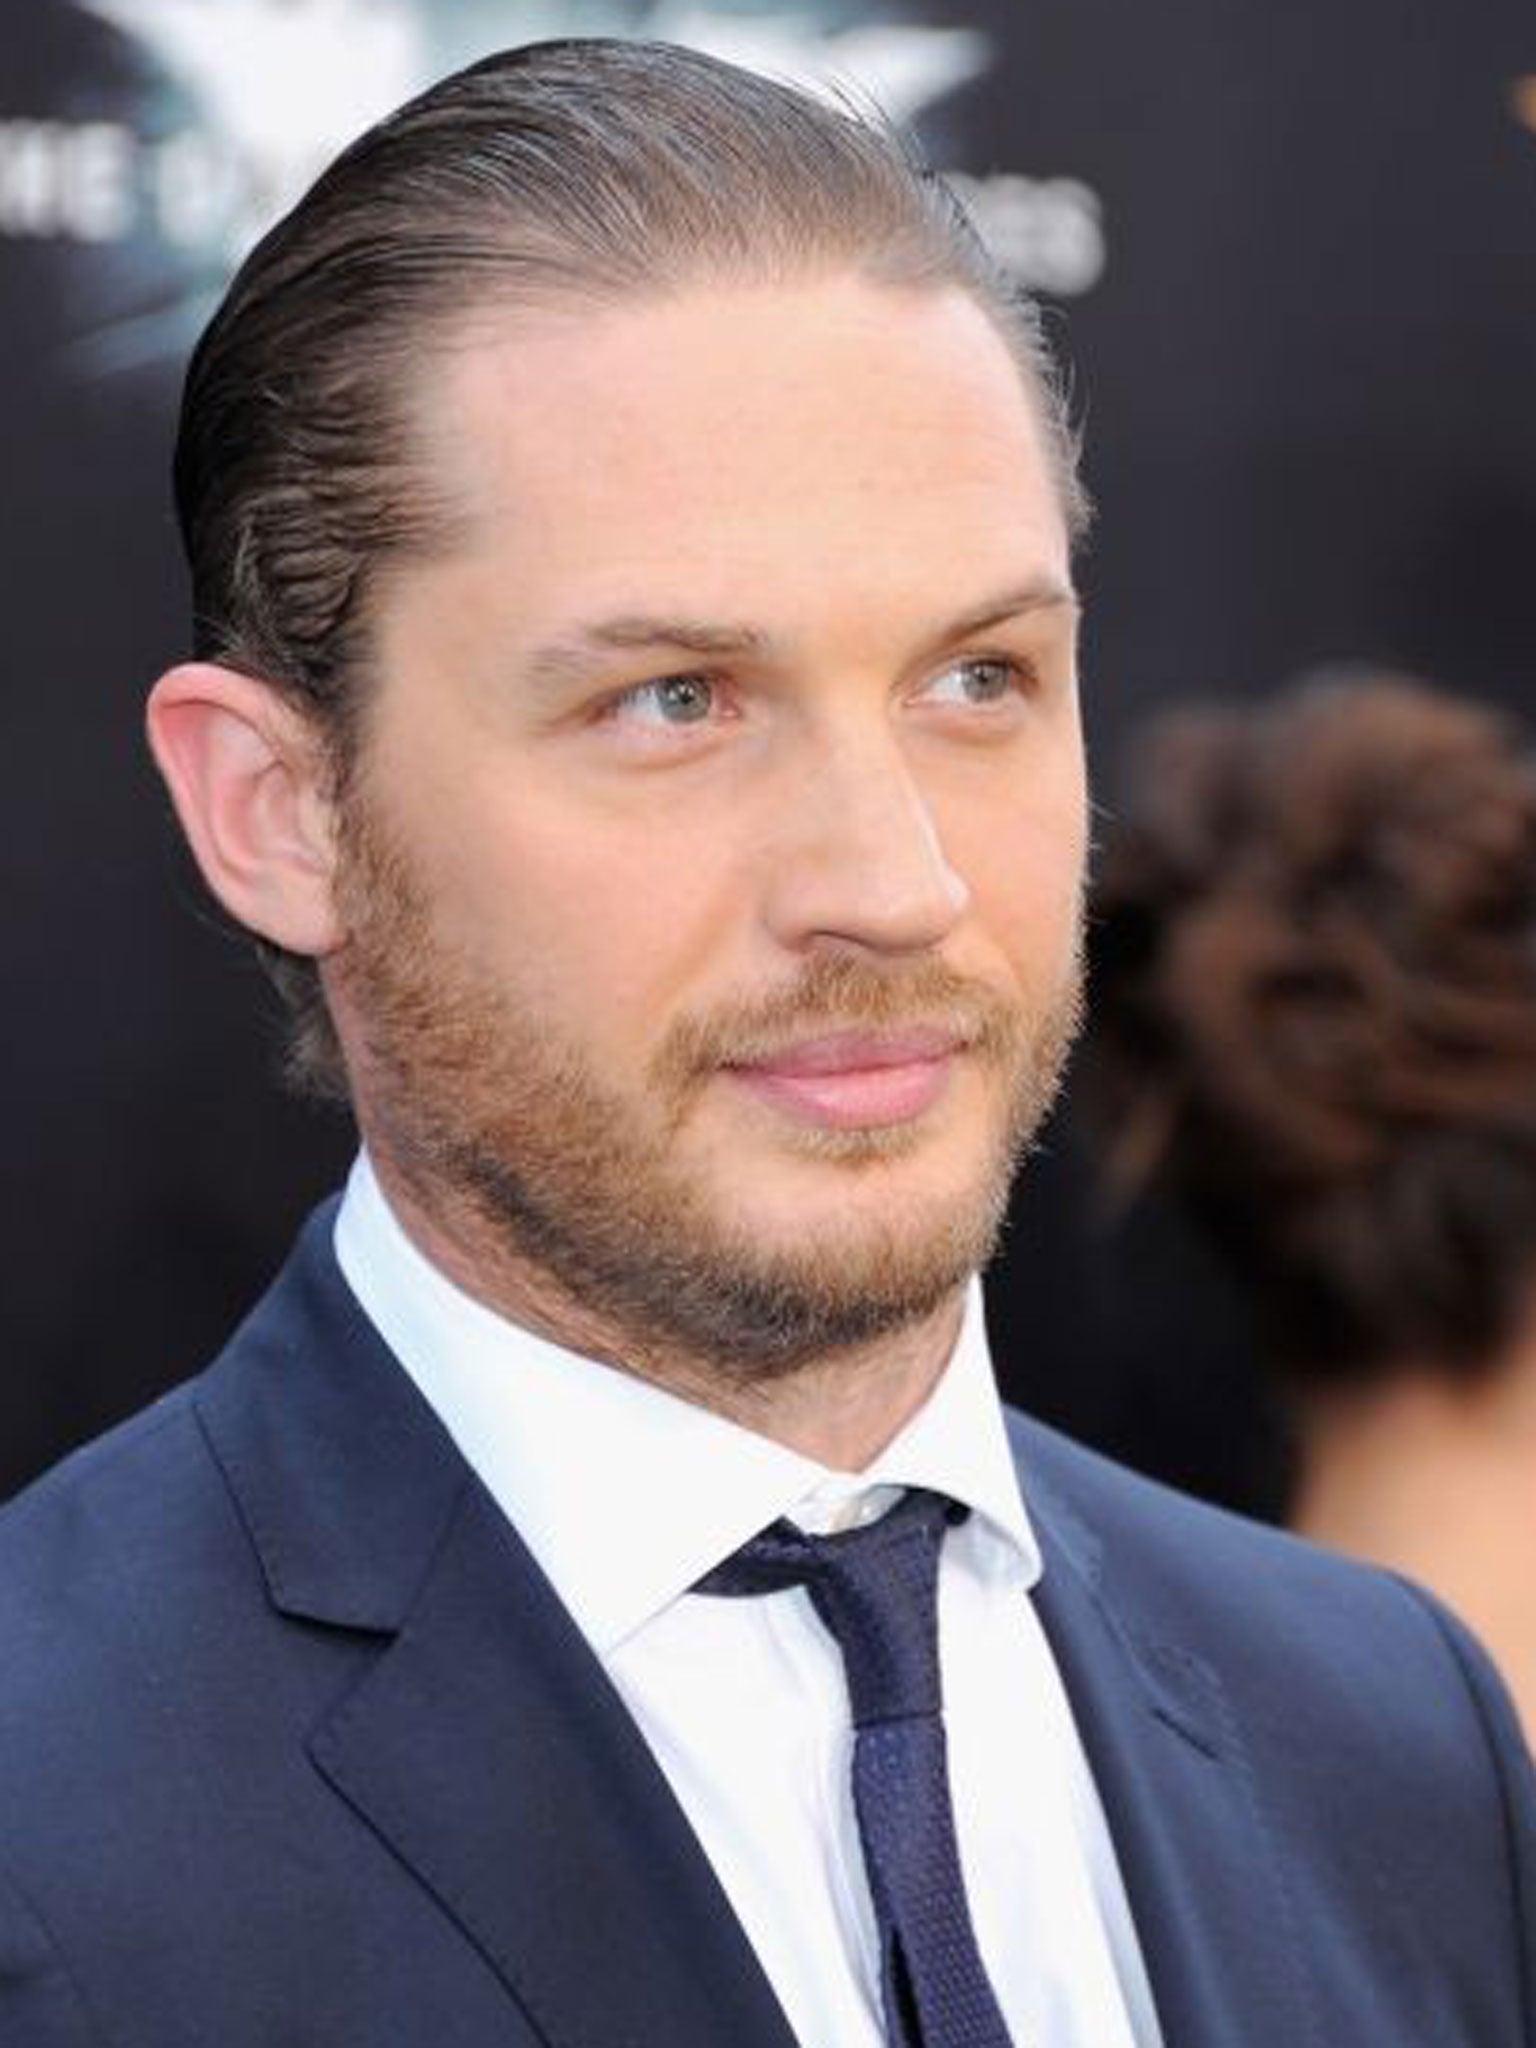 Tom Hardy will join the cast of BBC series Peaky Blinders